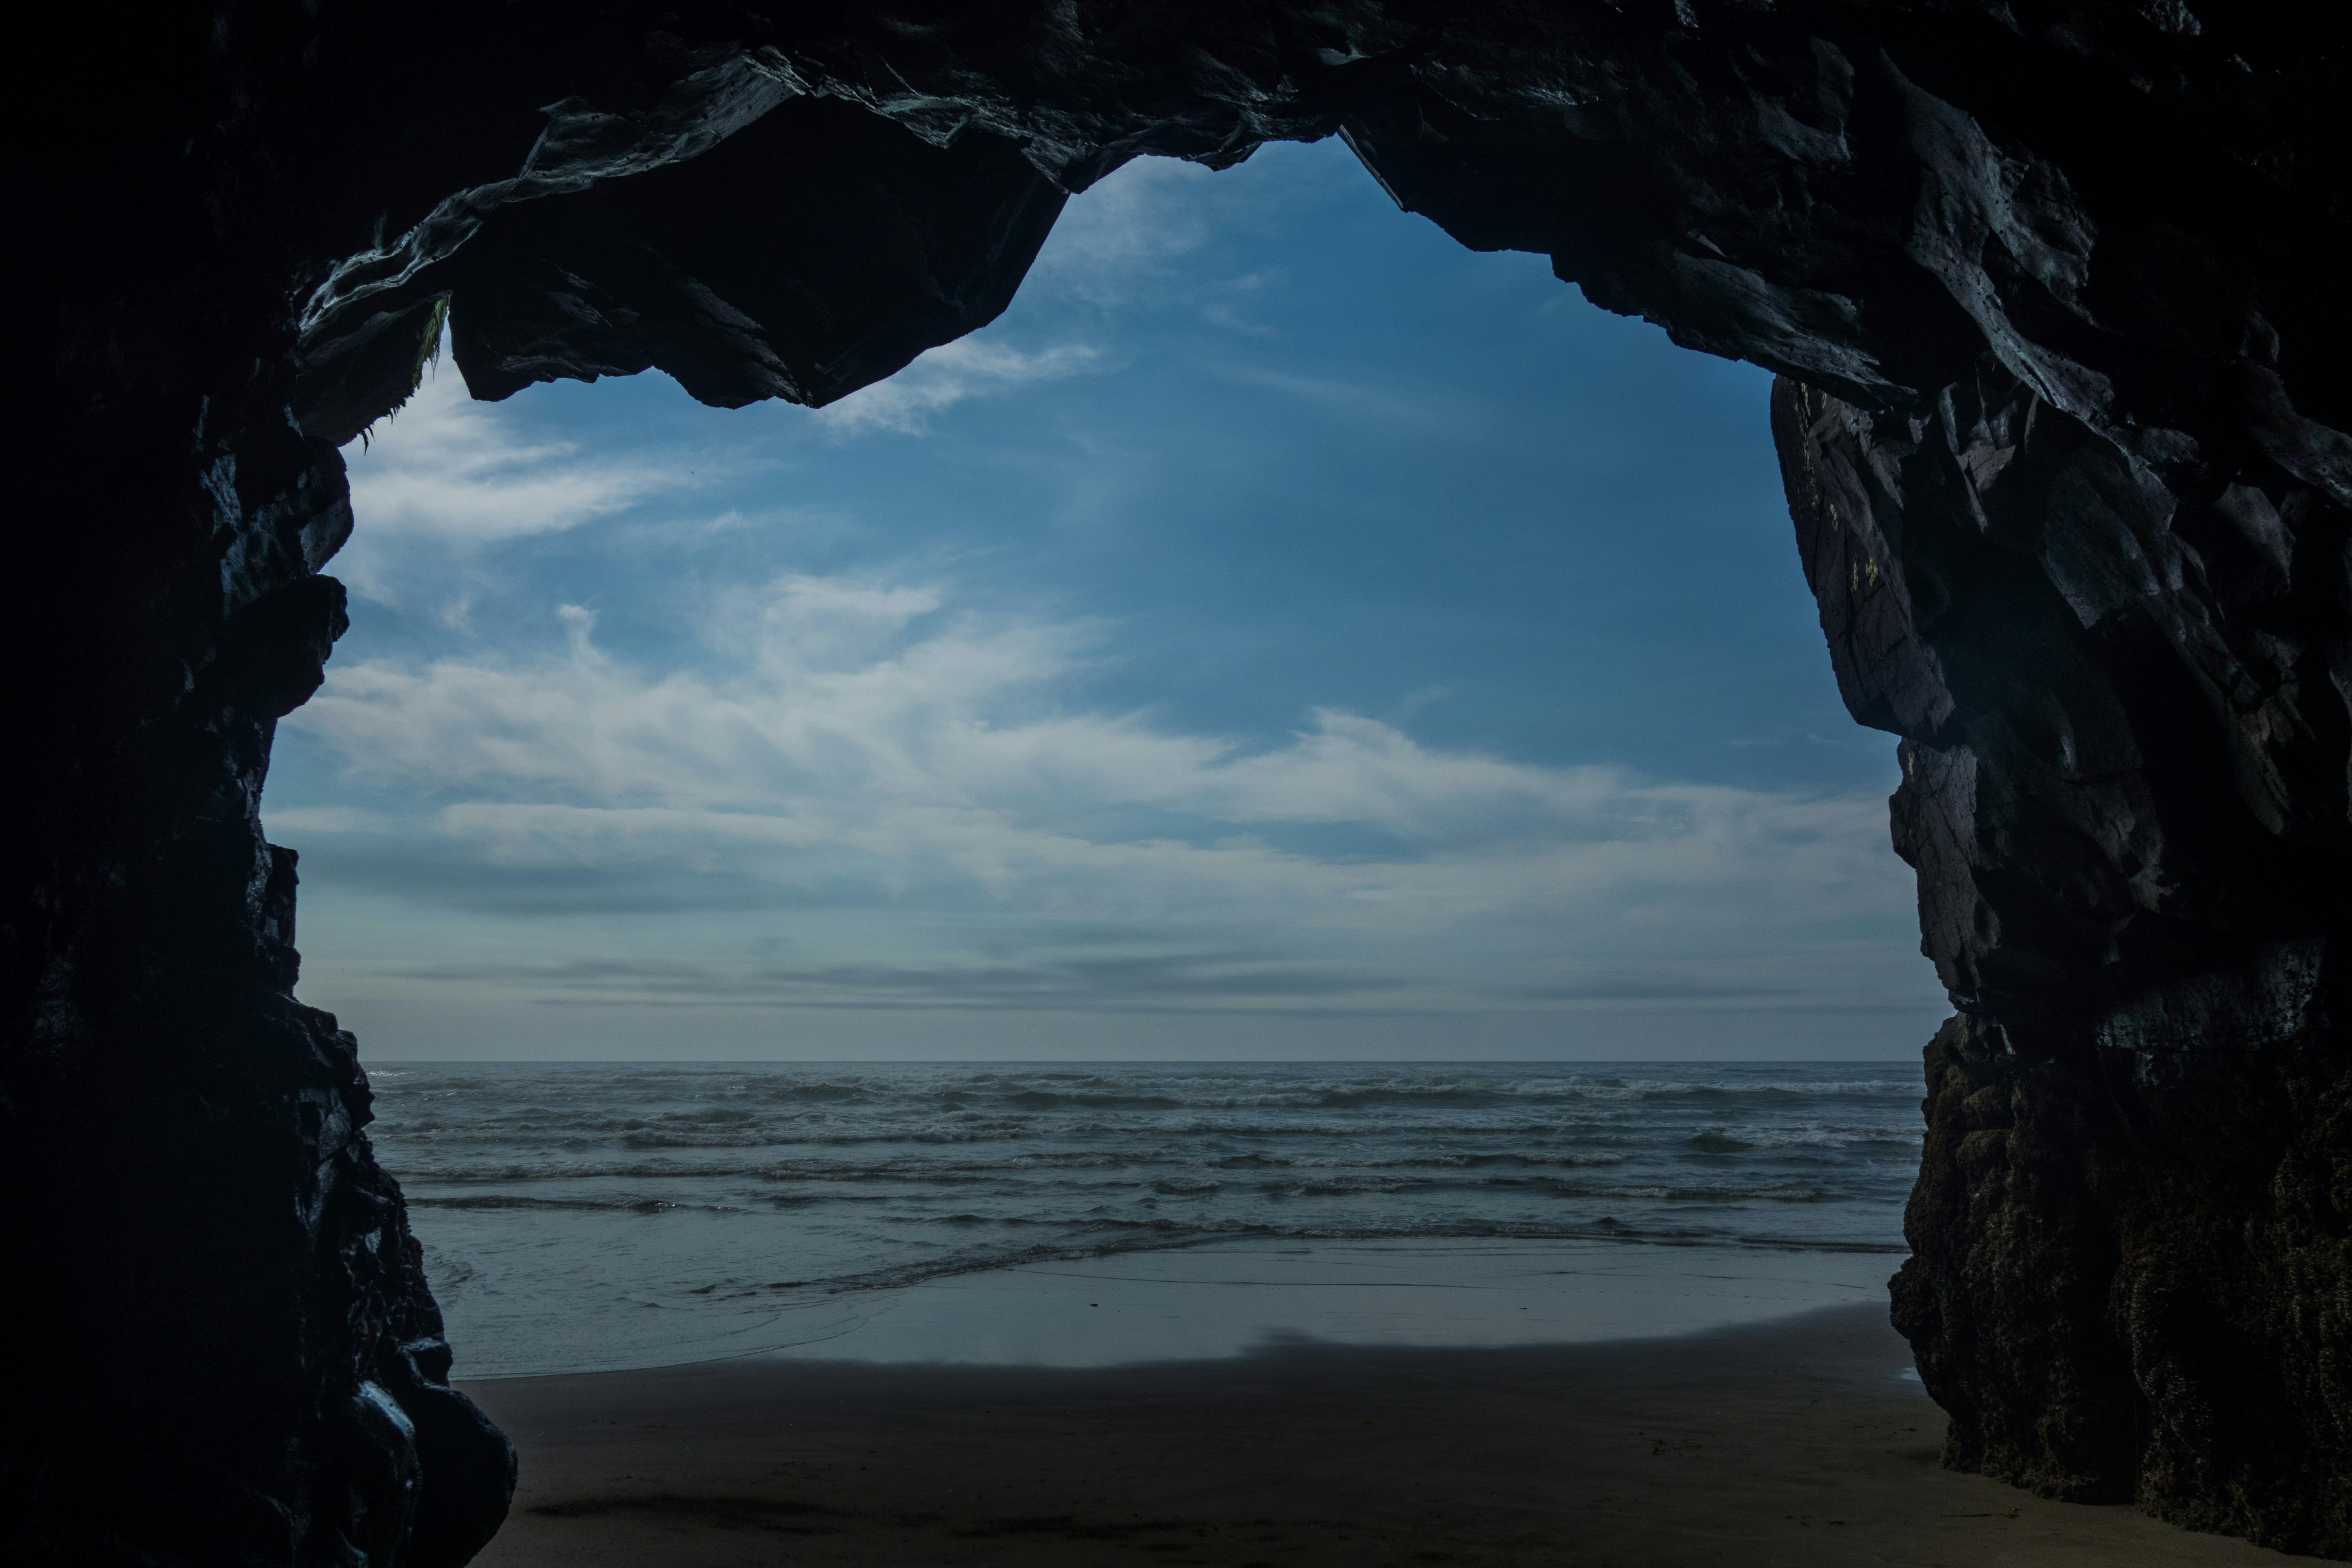 Some Views are Better than Others.
Walking along the beach on the Oregon Coast and came across this empty cave.